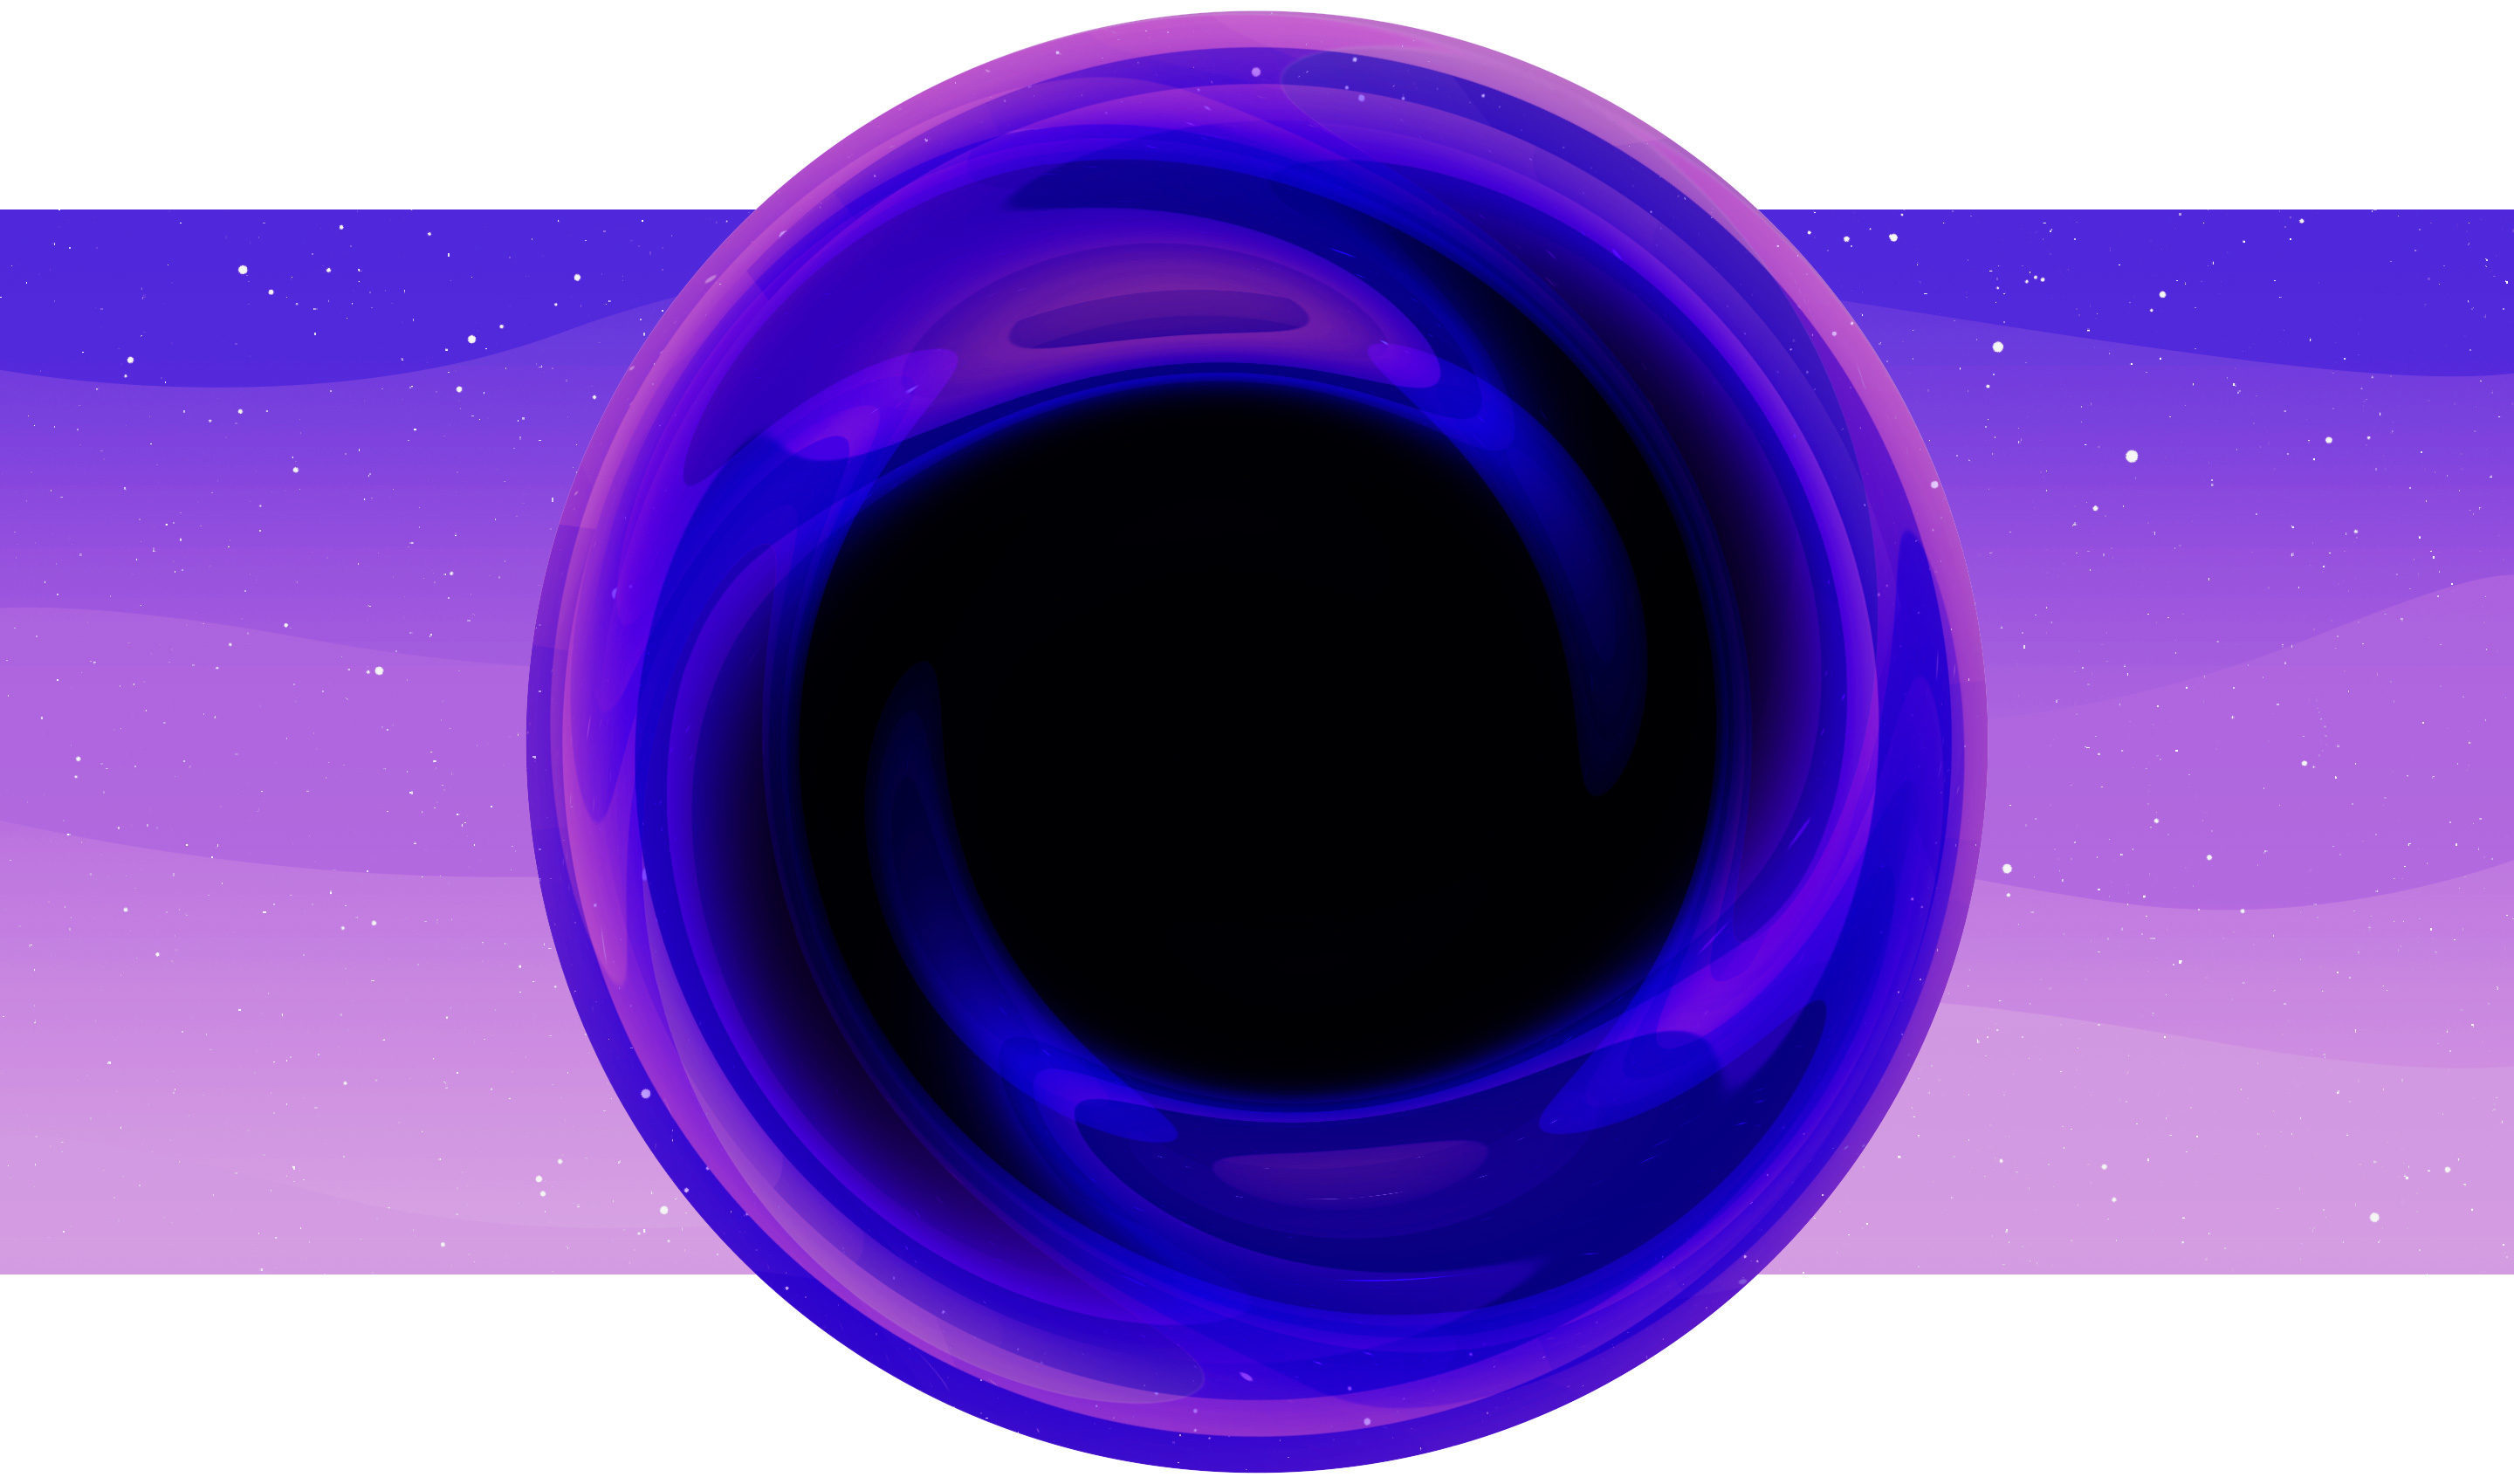 Physicists discuss the possible detection of a black hole so large it shouldn't even exist